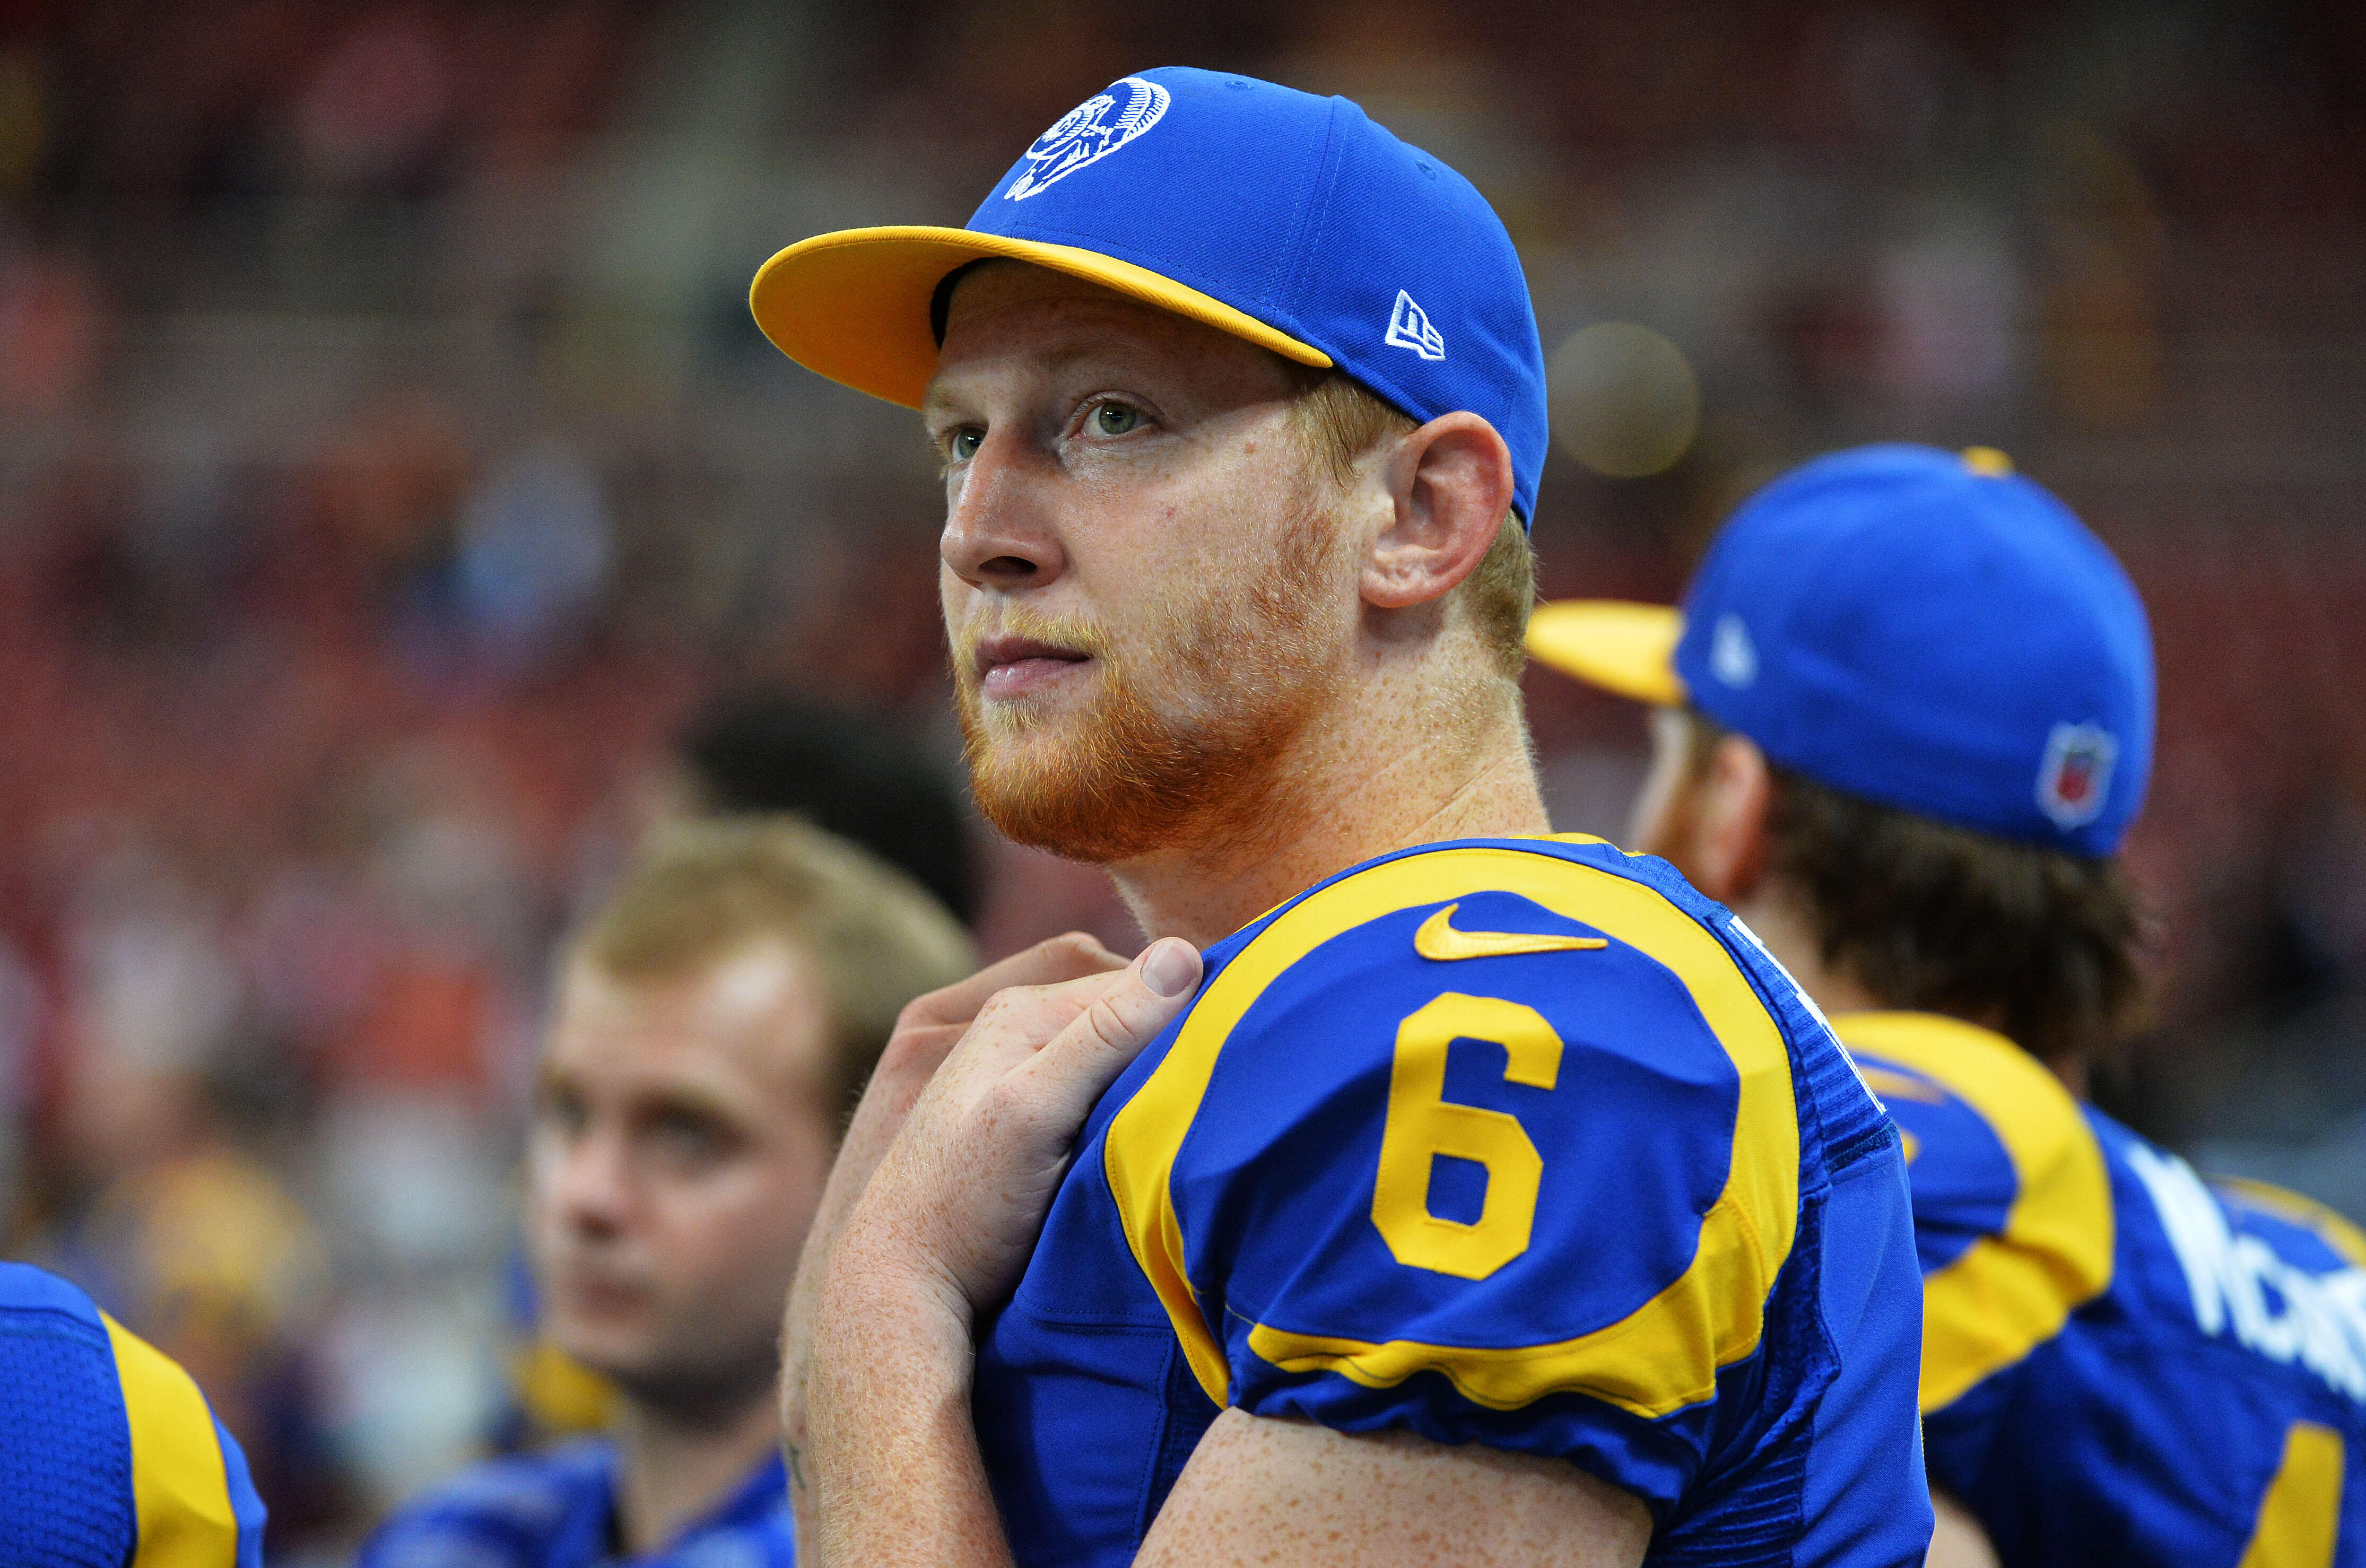 ST LOUIS, MO - OCTOBER 13:  Johnny Hekker #6 of the St. Louis Rams reacts during the fourth quarter of their 31 to 17 loss to the San Francisco 49ers at Edward Jones Dome on October 13, 2014 in St Louis, Missouri.  (Photo by Michael Thomas/Getty Images)